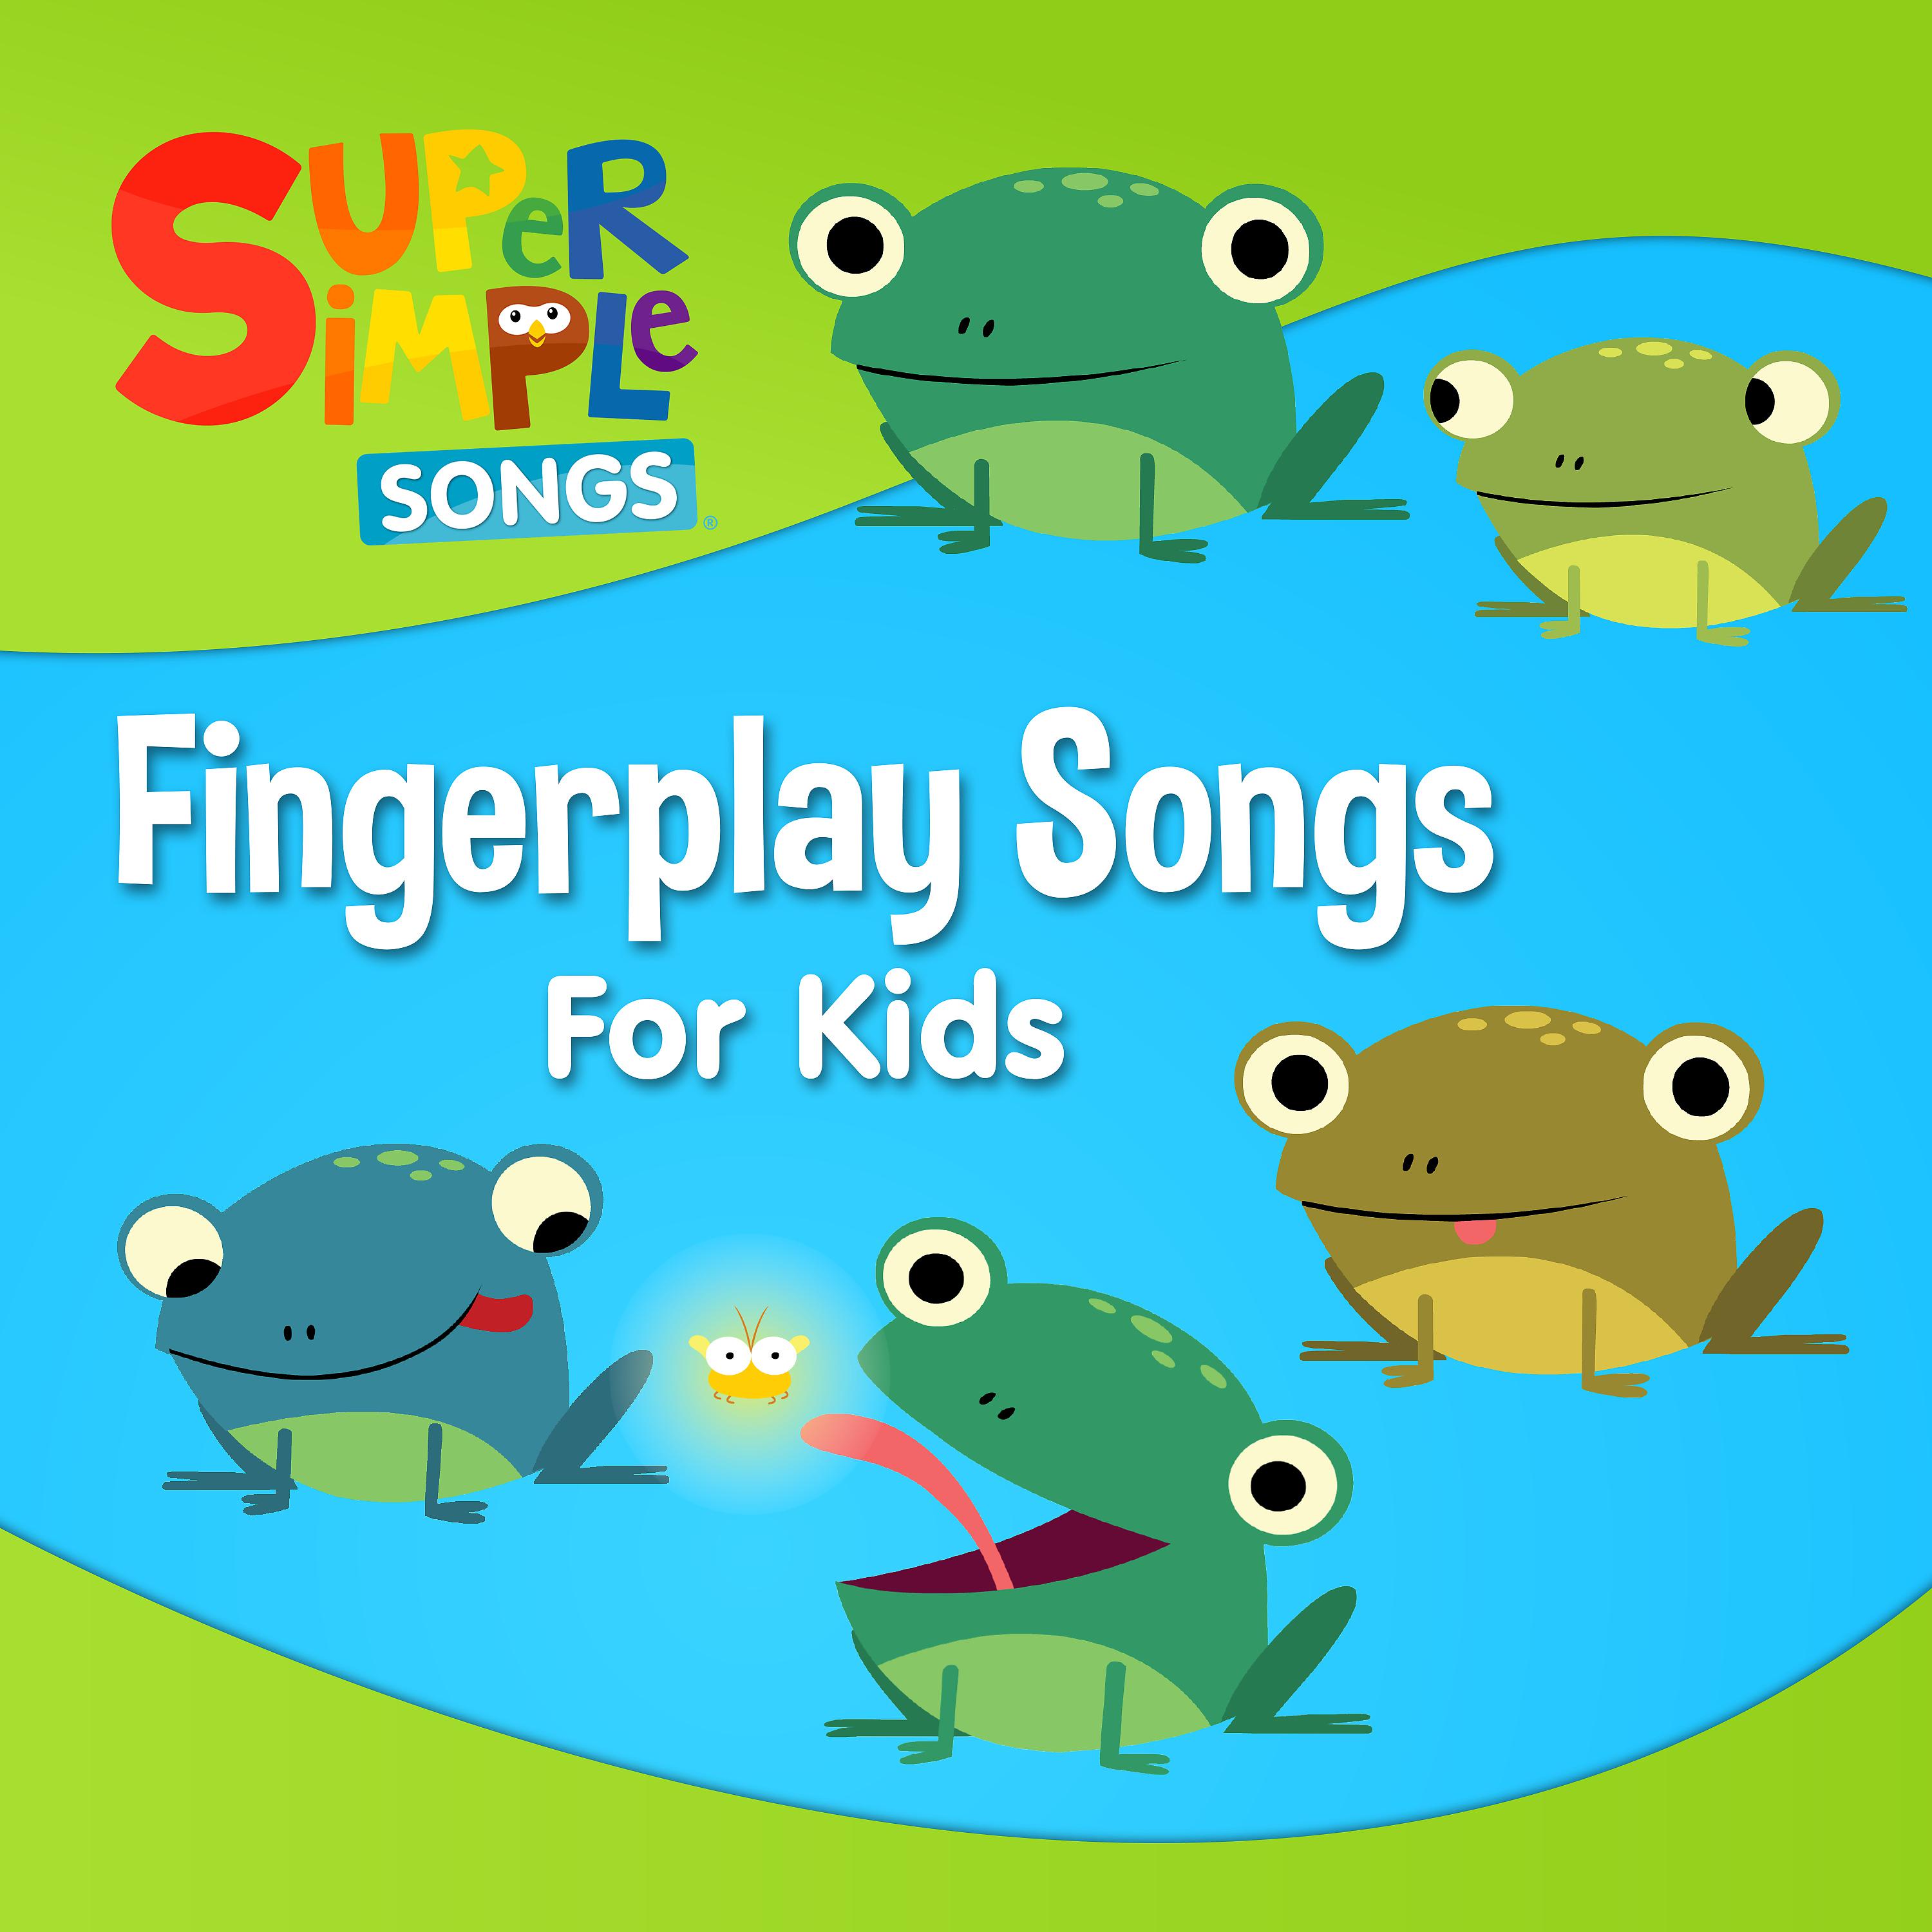 Baby simple songs. Five little Baby Sharks. Itsy Bitsy Spider super simple Songs. Super simple Songs. Super simple Songs Kids Songs.